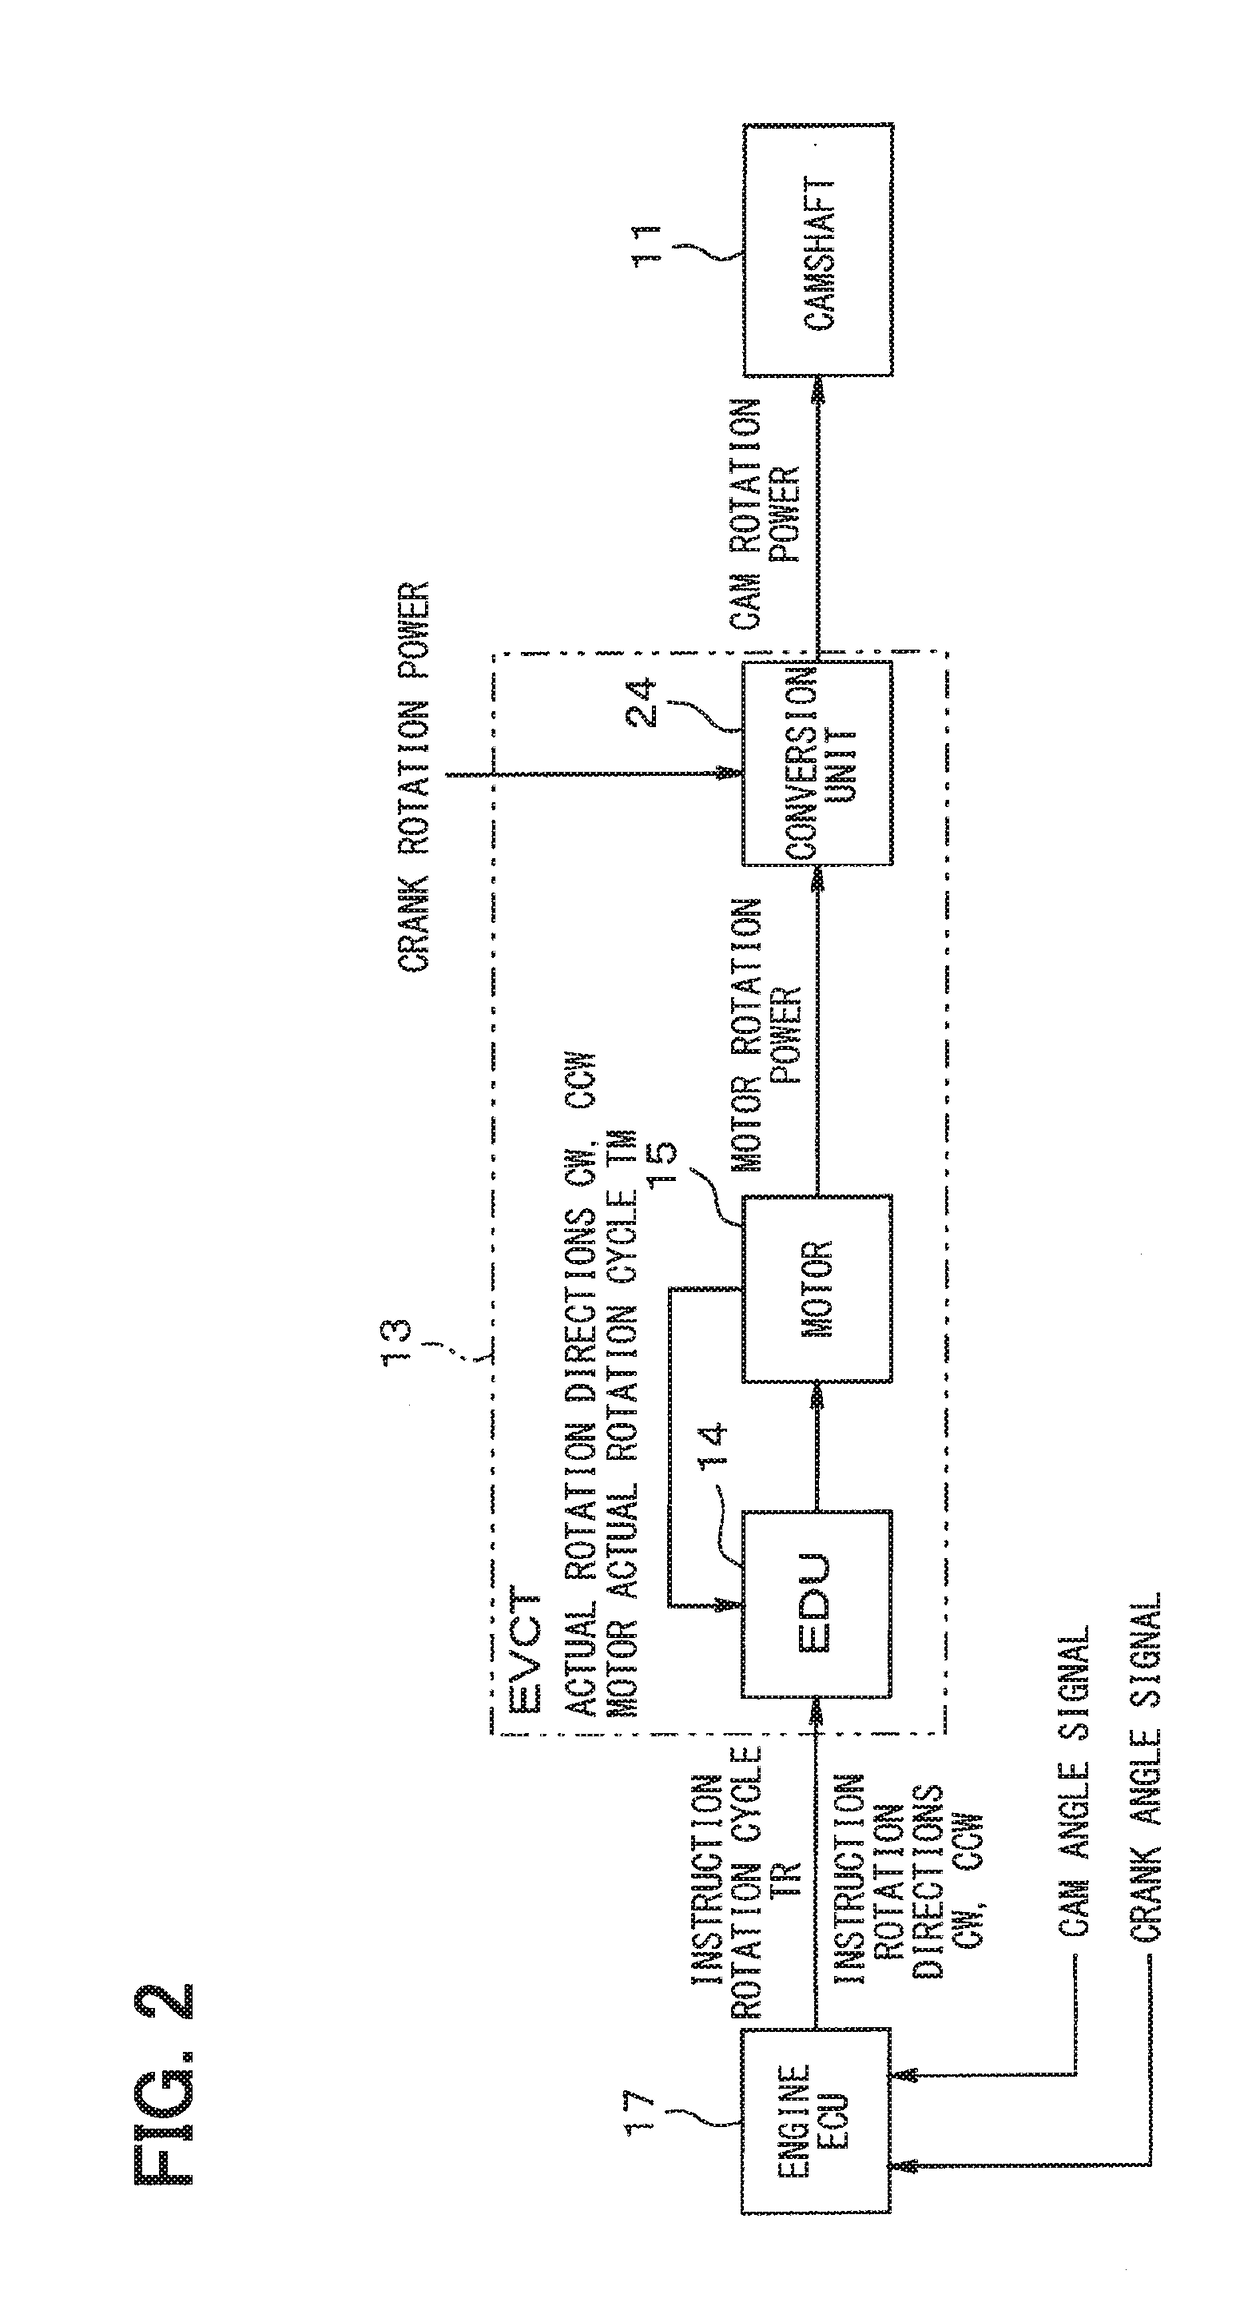 Motor drive device for controlling valve timing of internal combustion engine